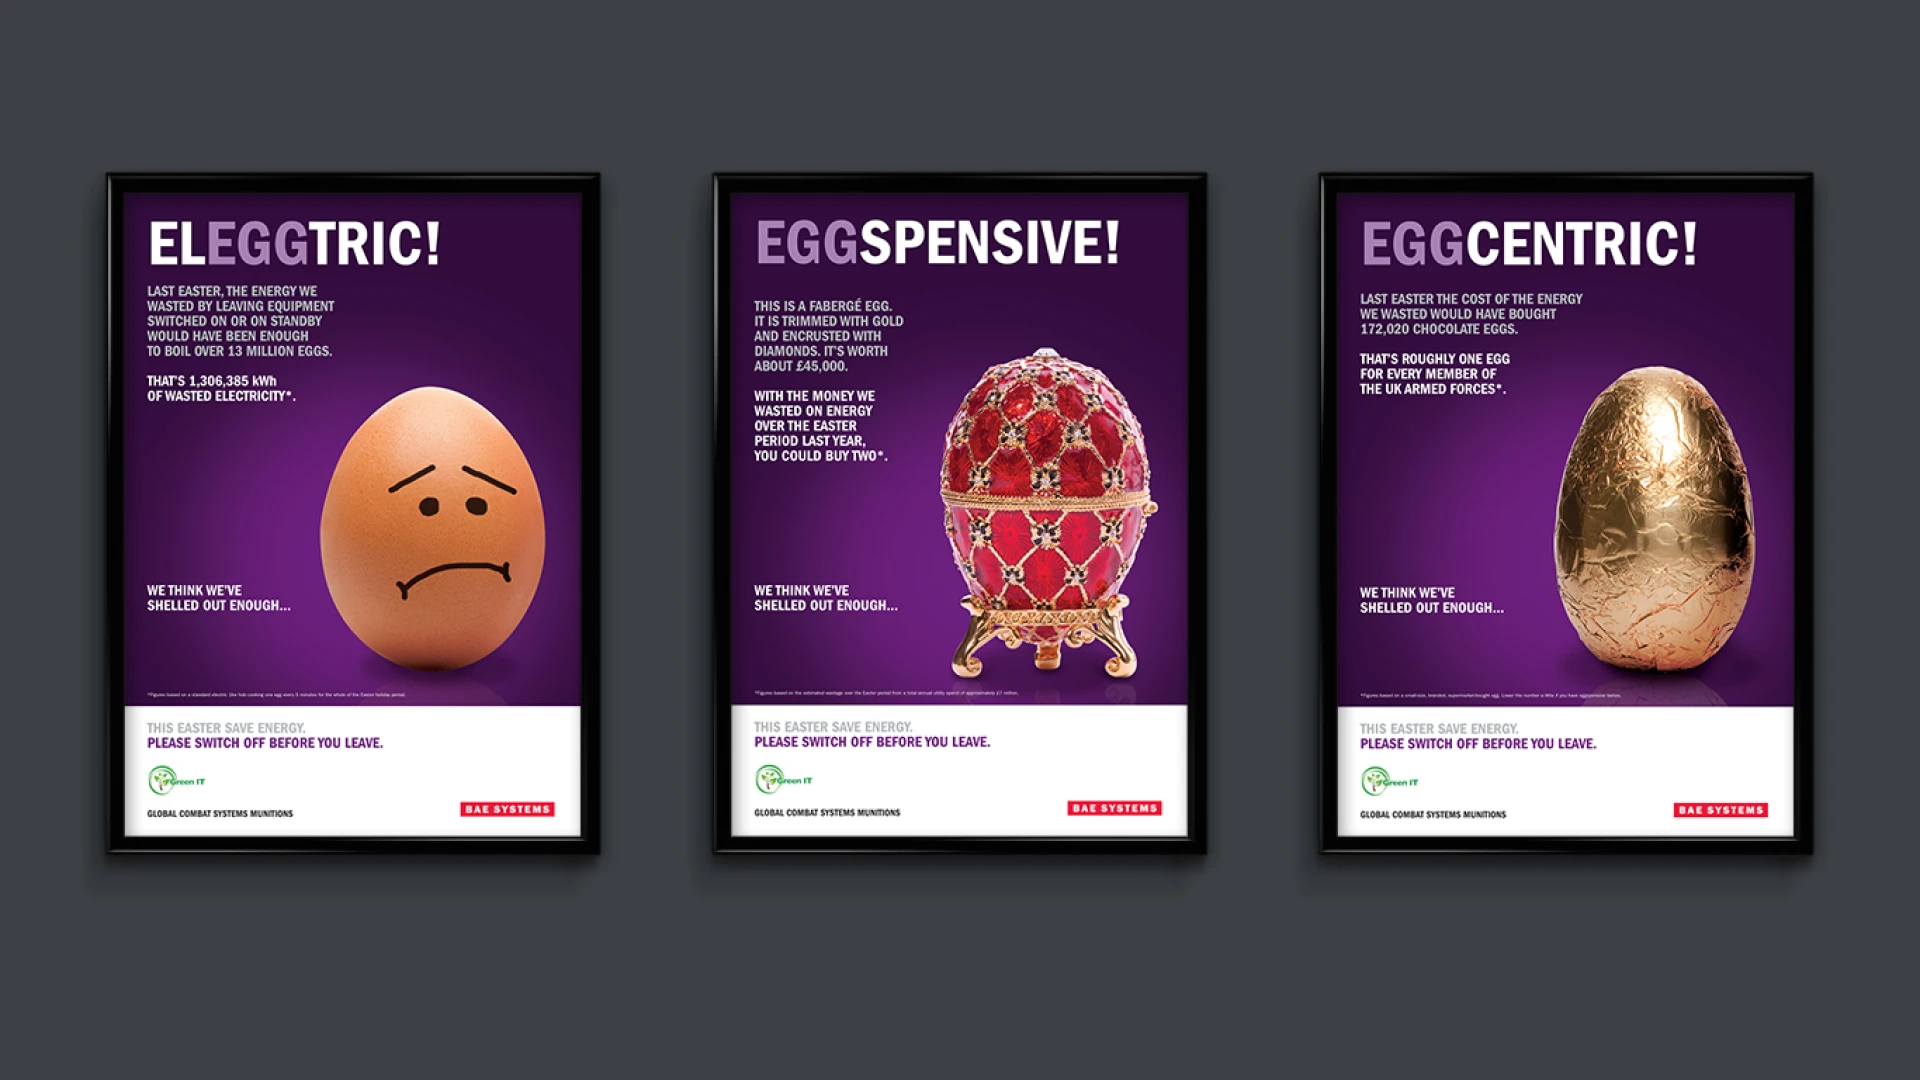 BAE Systems 'Energy Saving Waste' Campaign, 